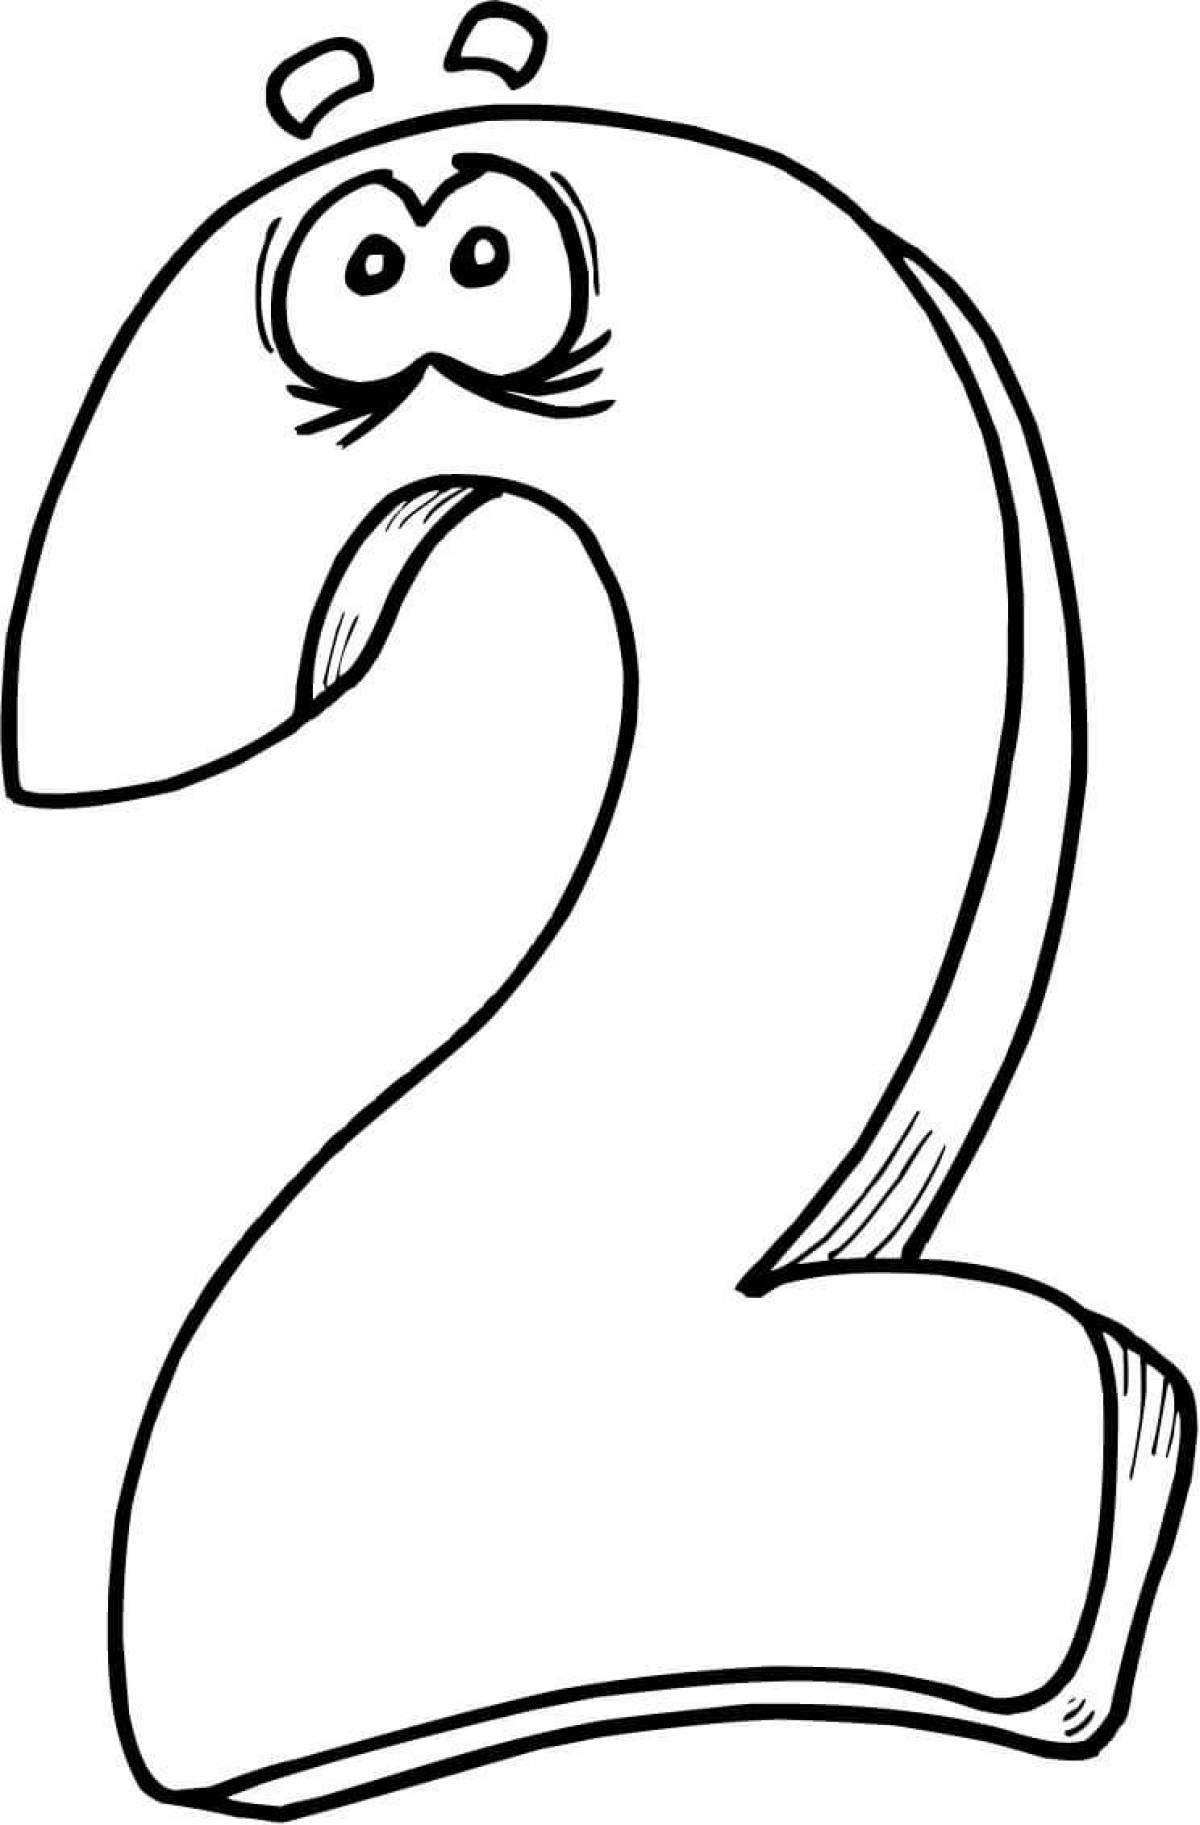 Creative coloring page 2